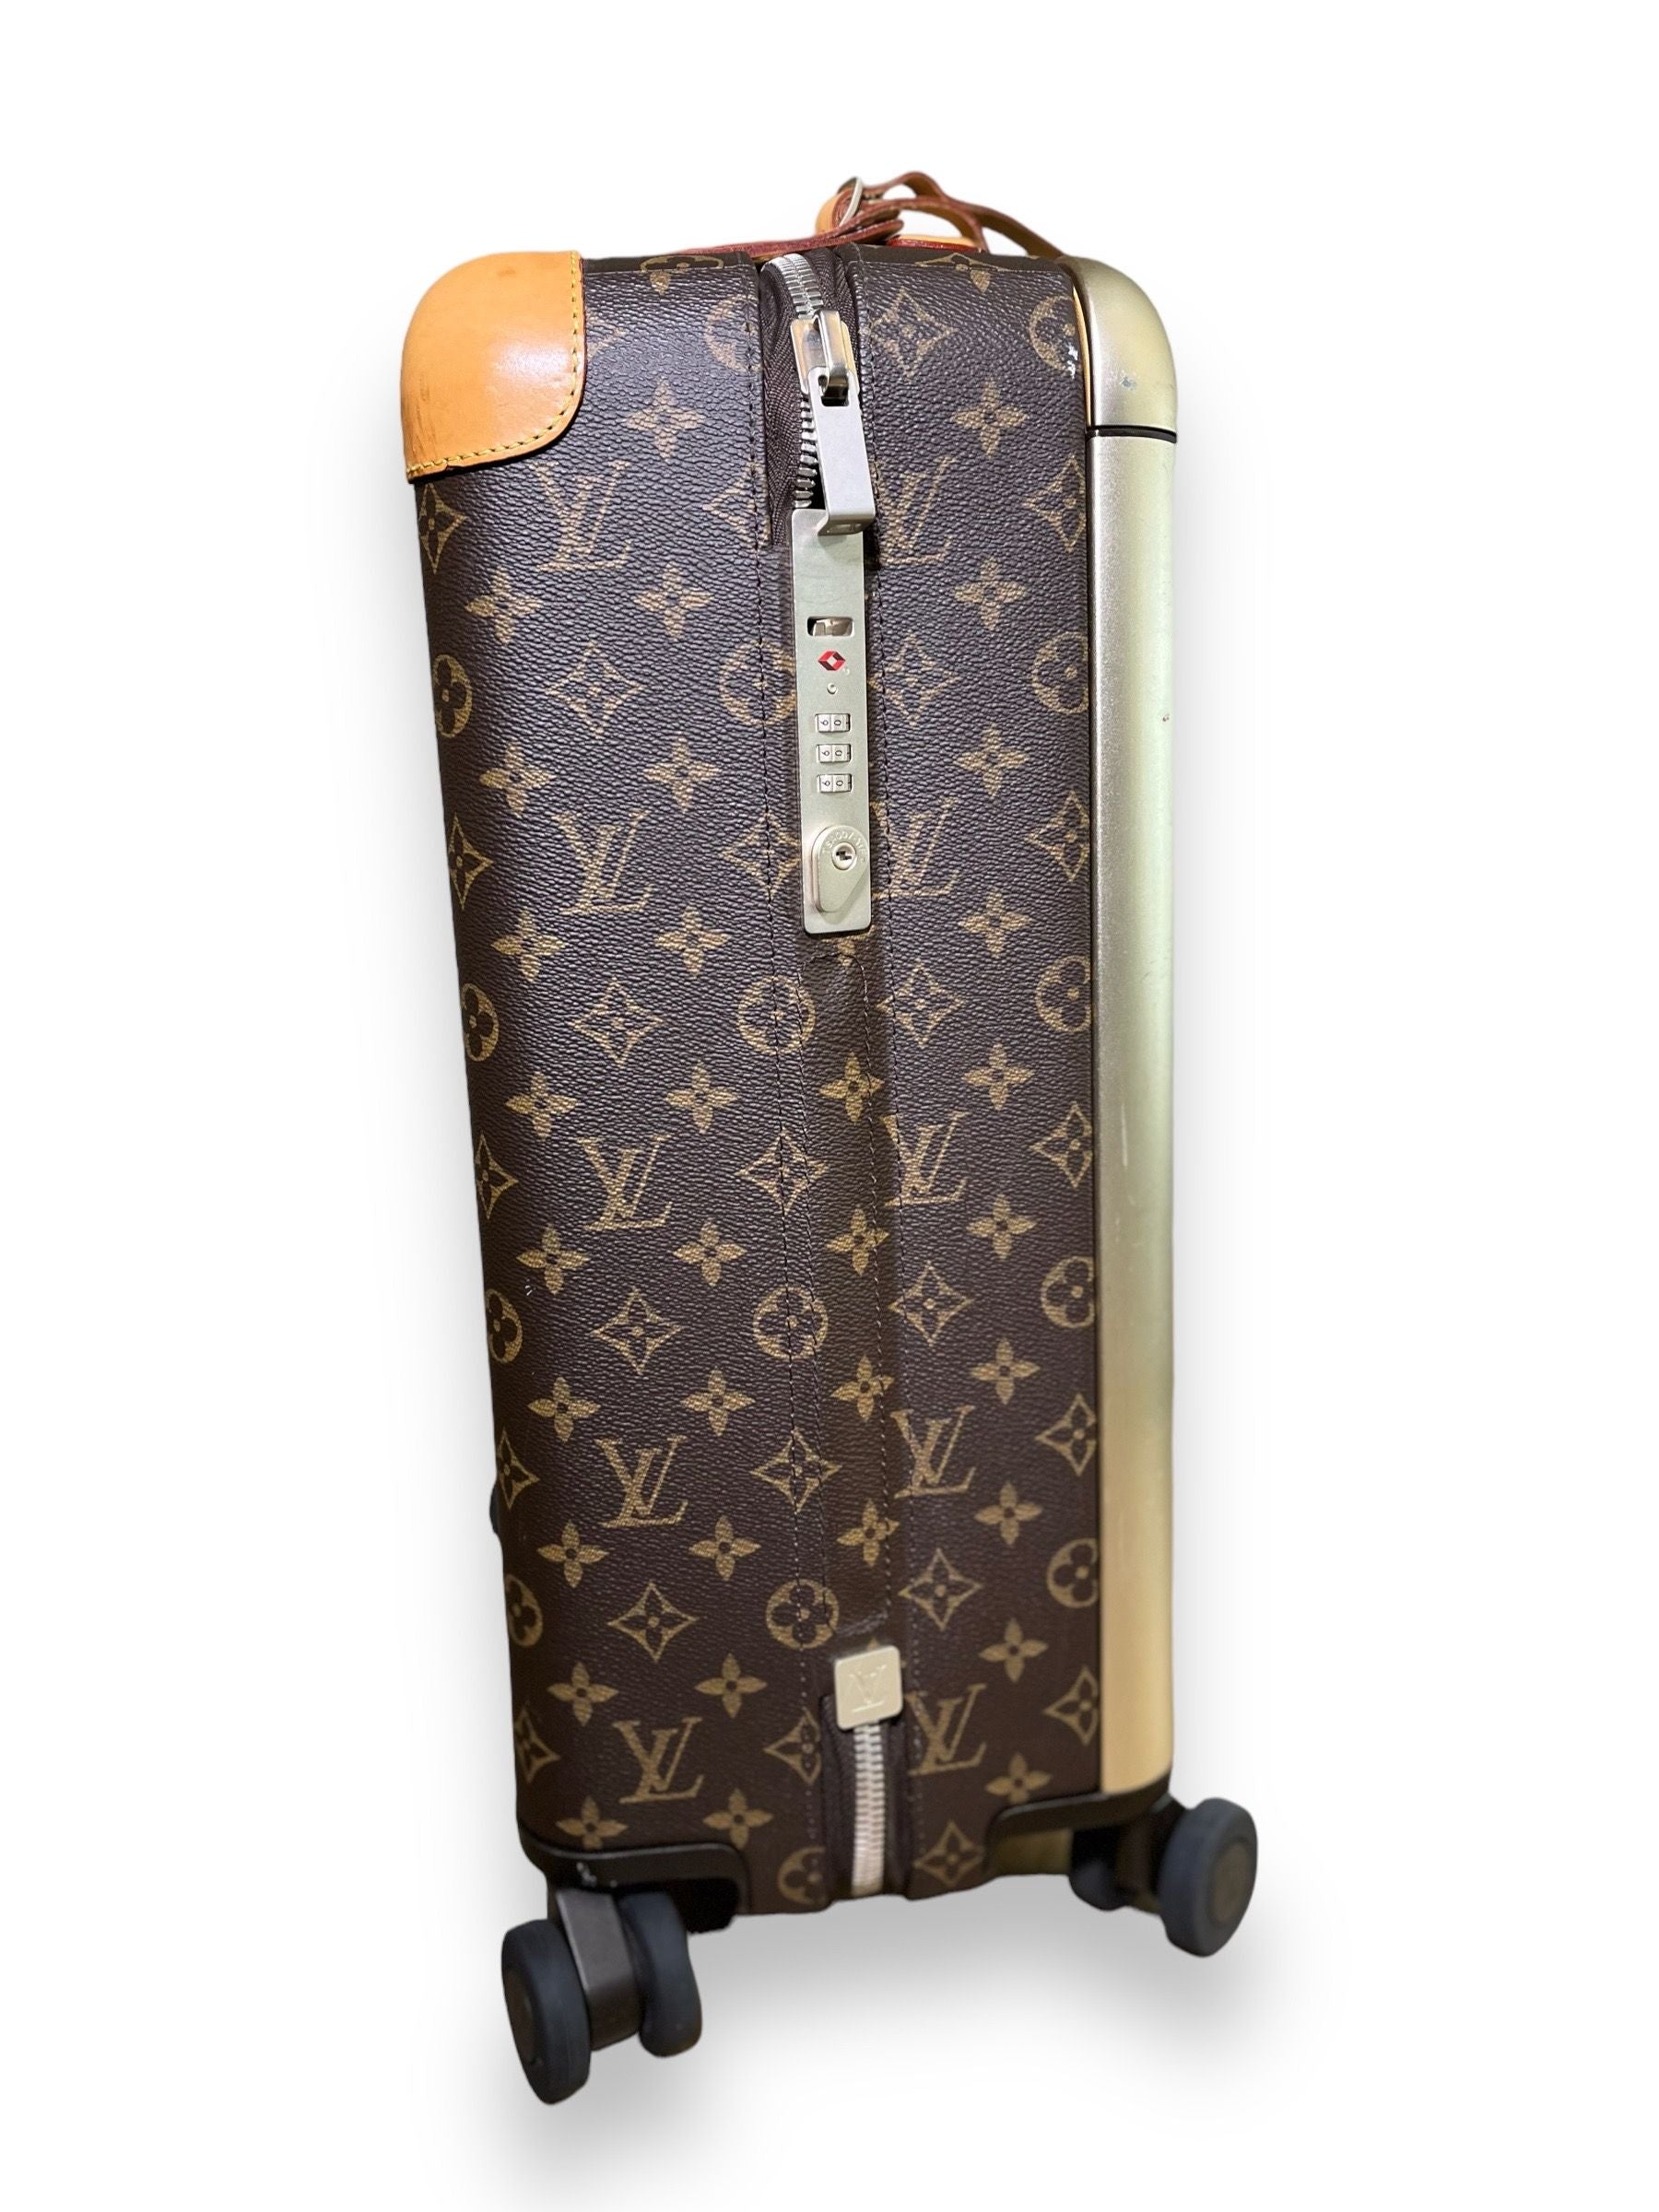 lv carry on suitcase